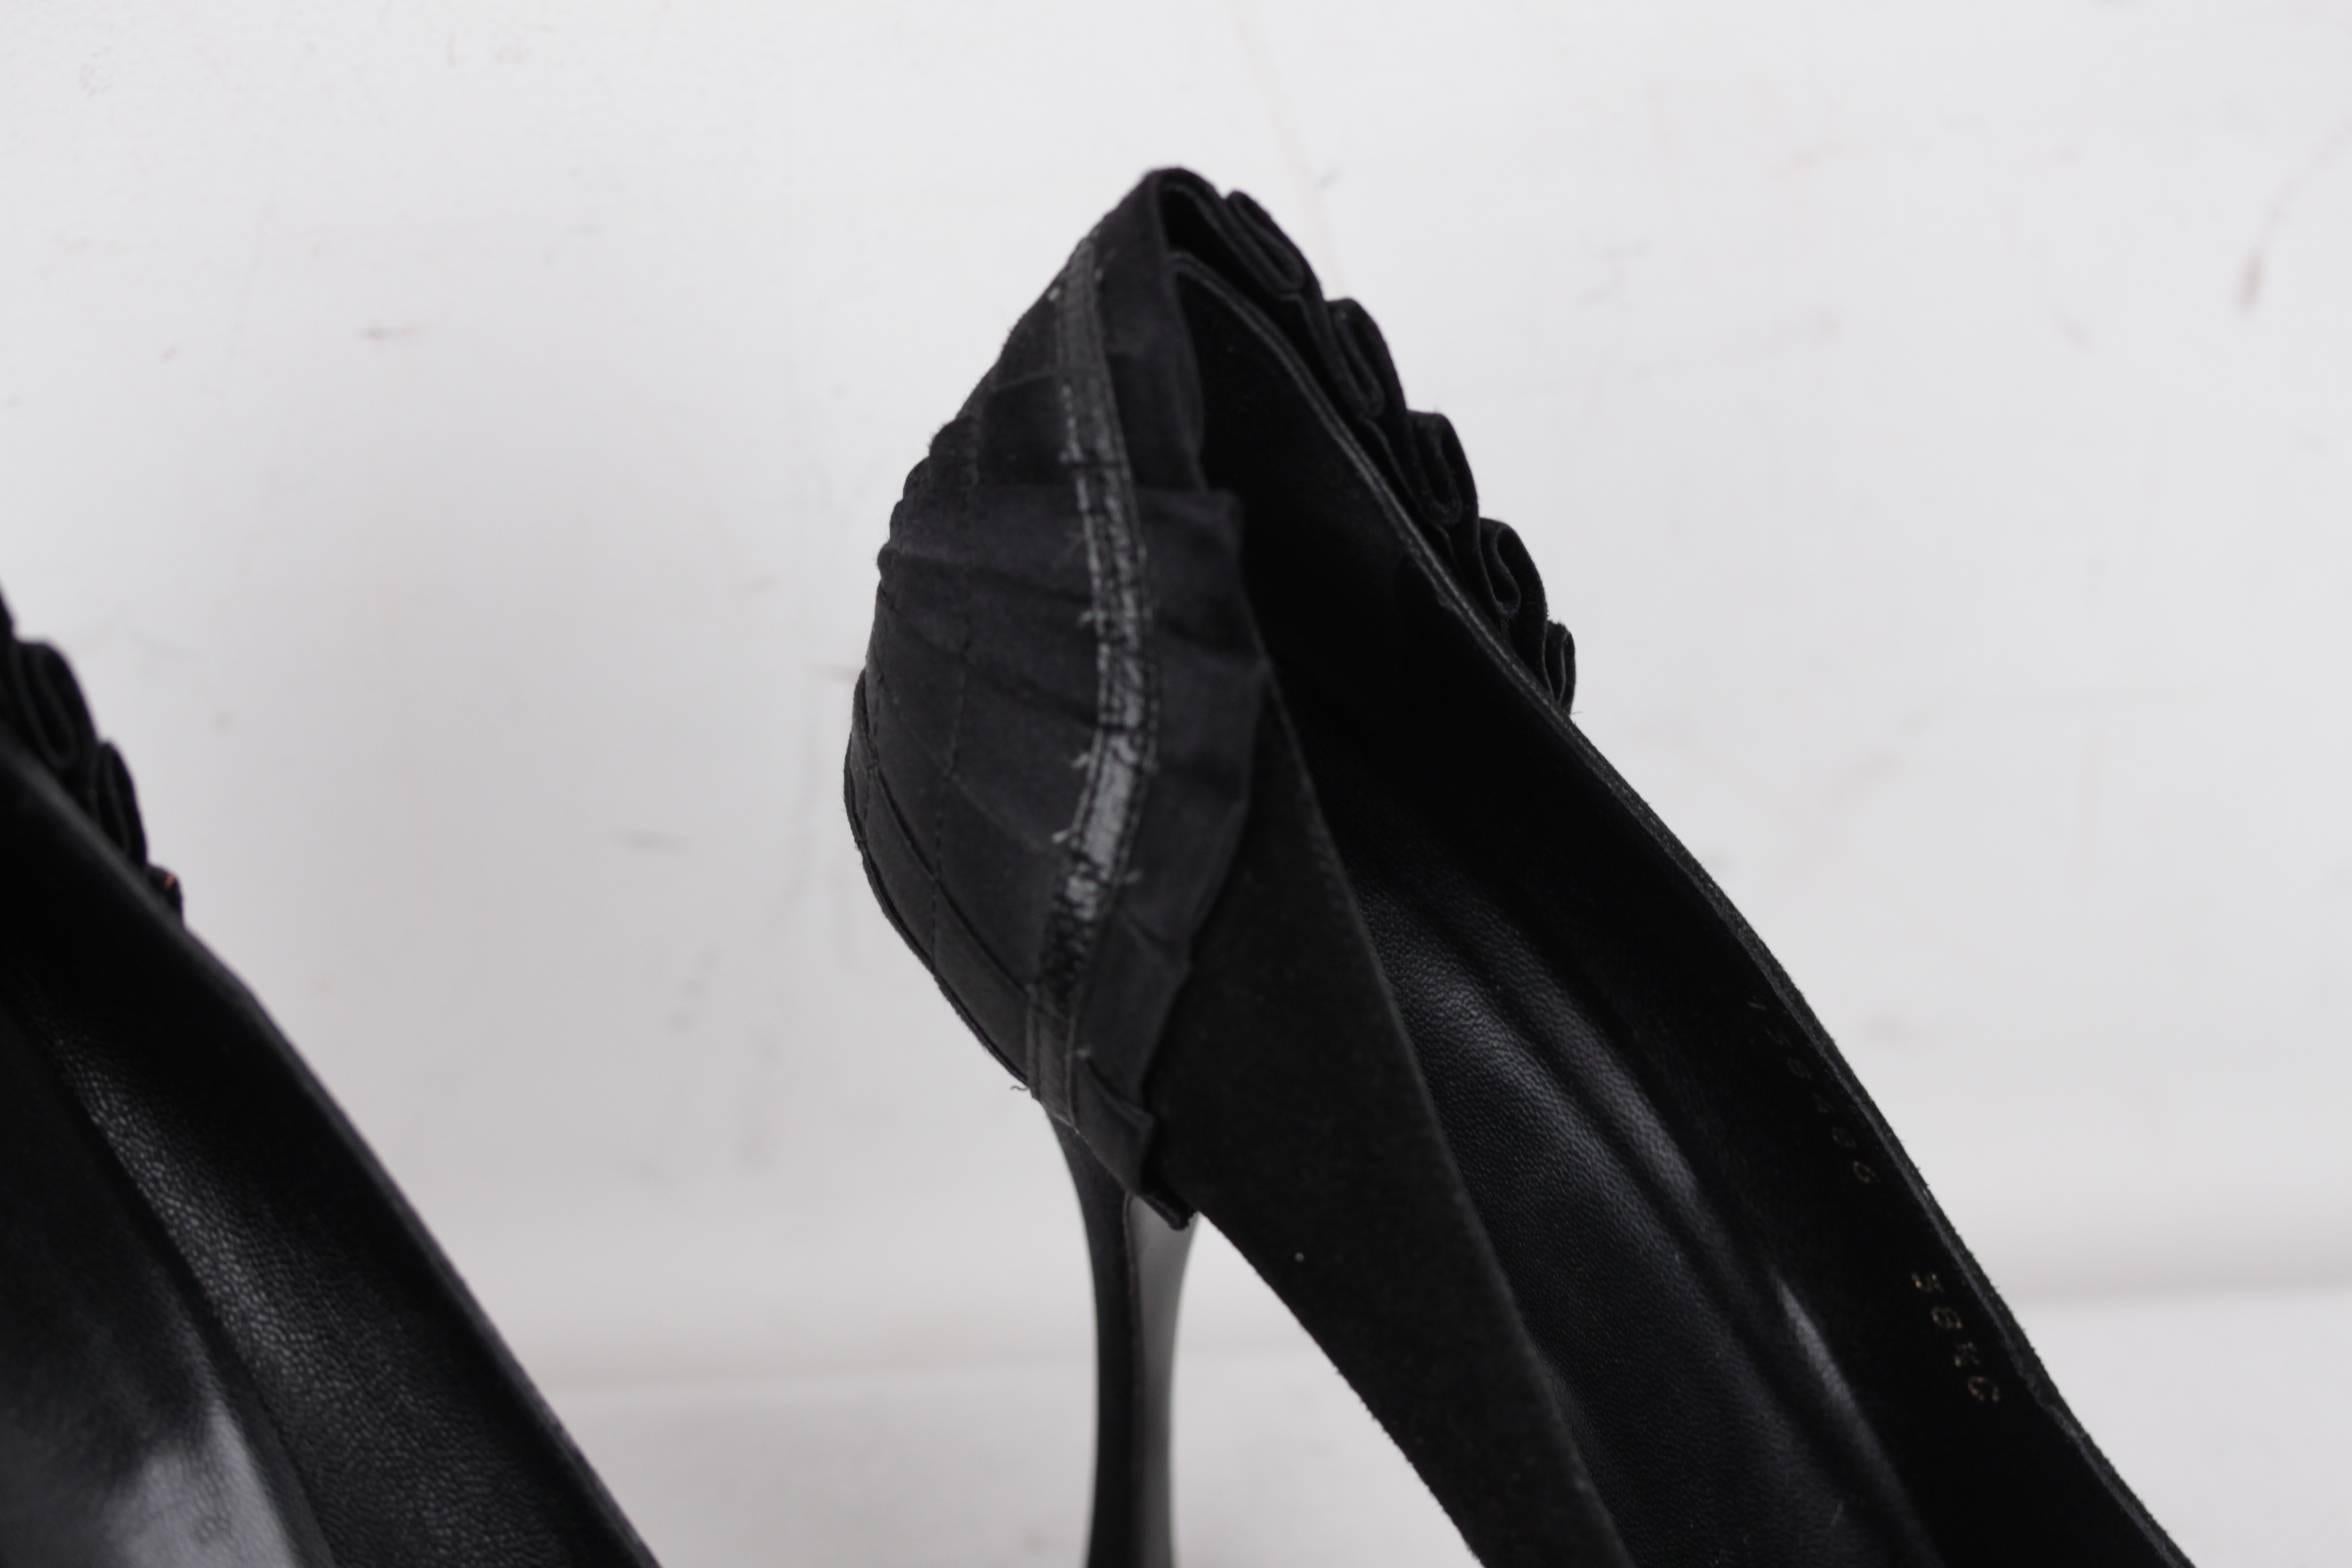 GUCCI Black Suede CLASSIC PUMPS Heels SHOES w/ PLEATED SATIN Back Sz 38 1/2 In Excellent Condition In Rome, Rome